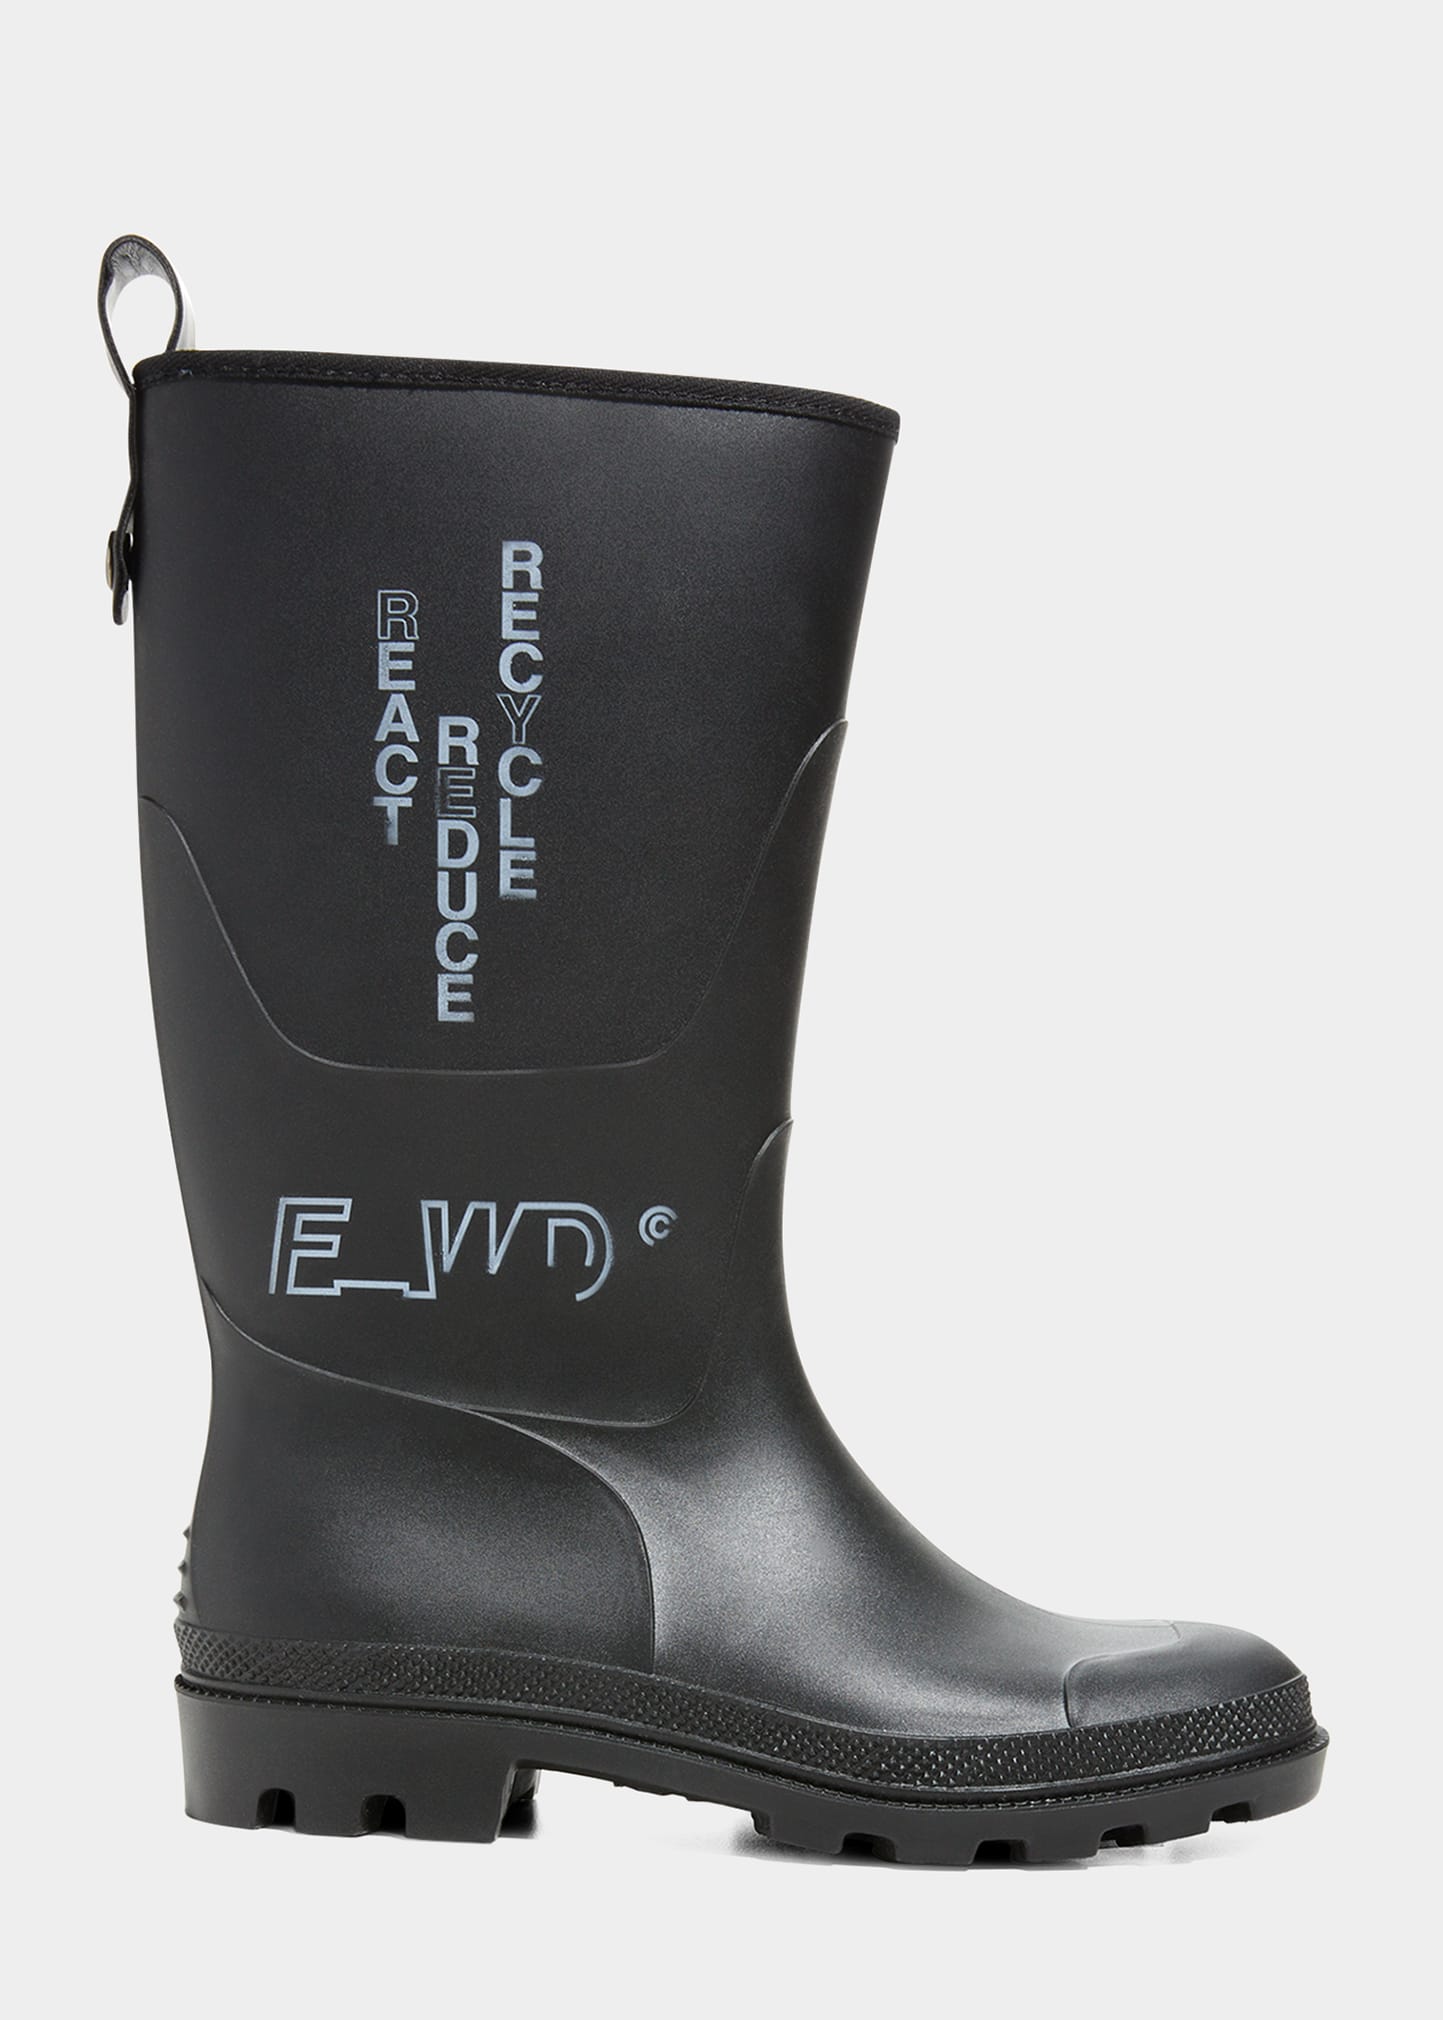 cerruti 1881 Wellies cream-brown printed lettering casual look Shoes High Boots Wellies 